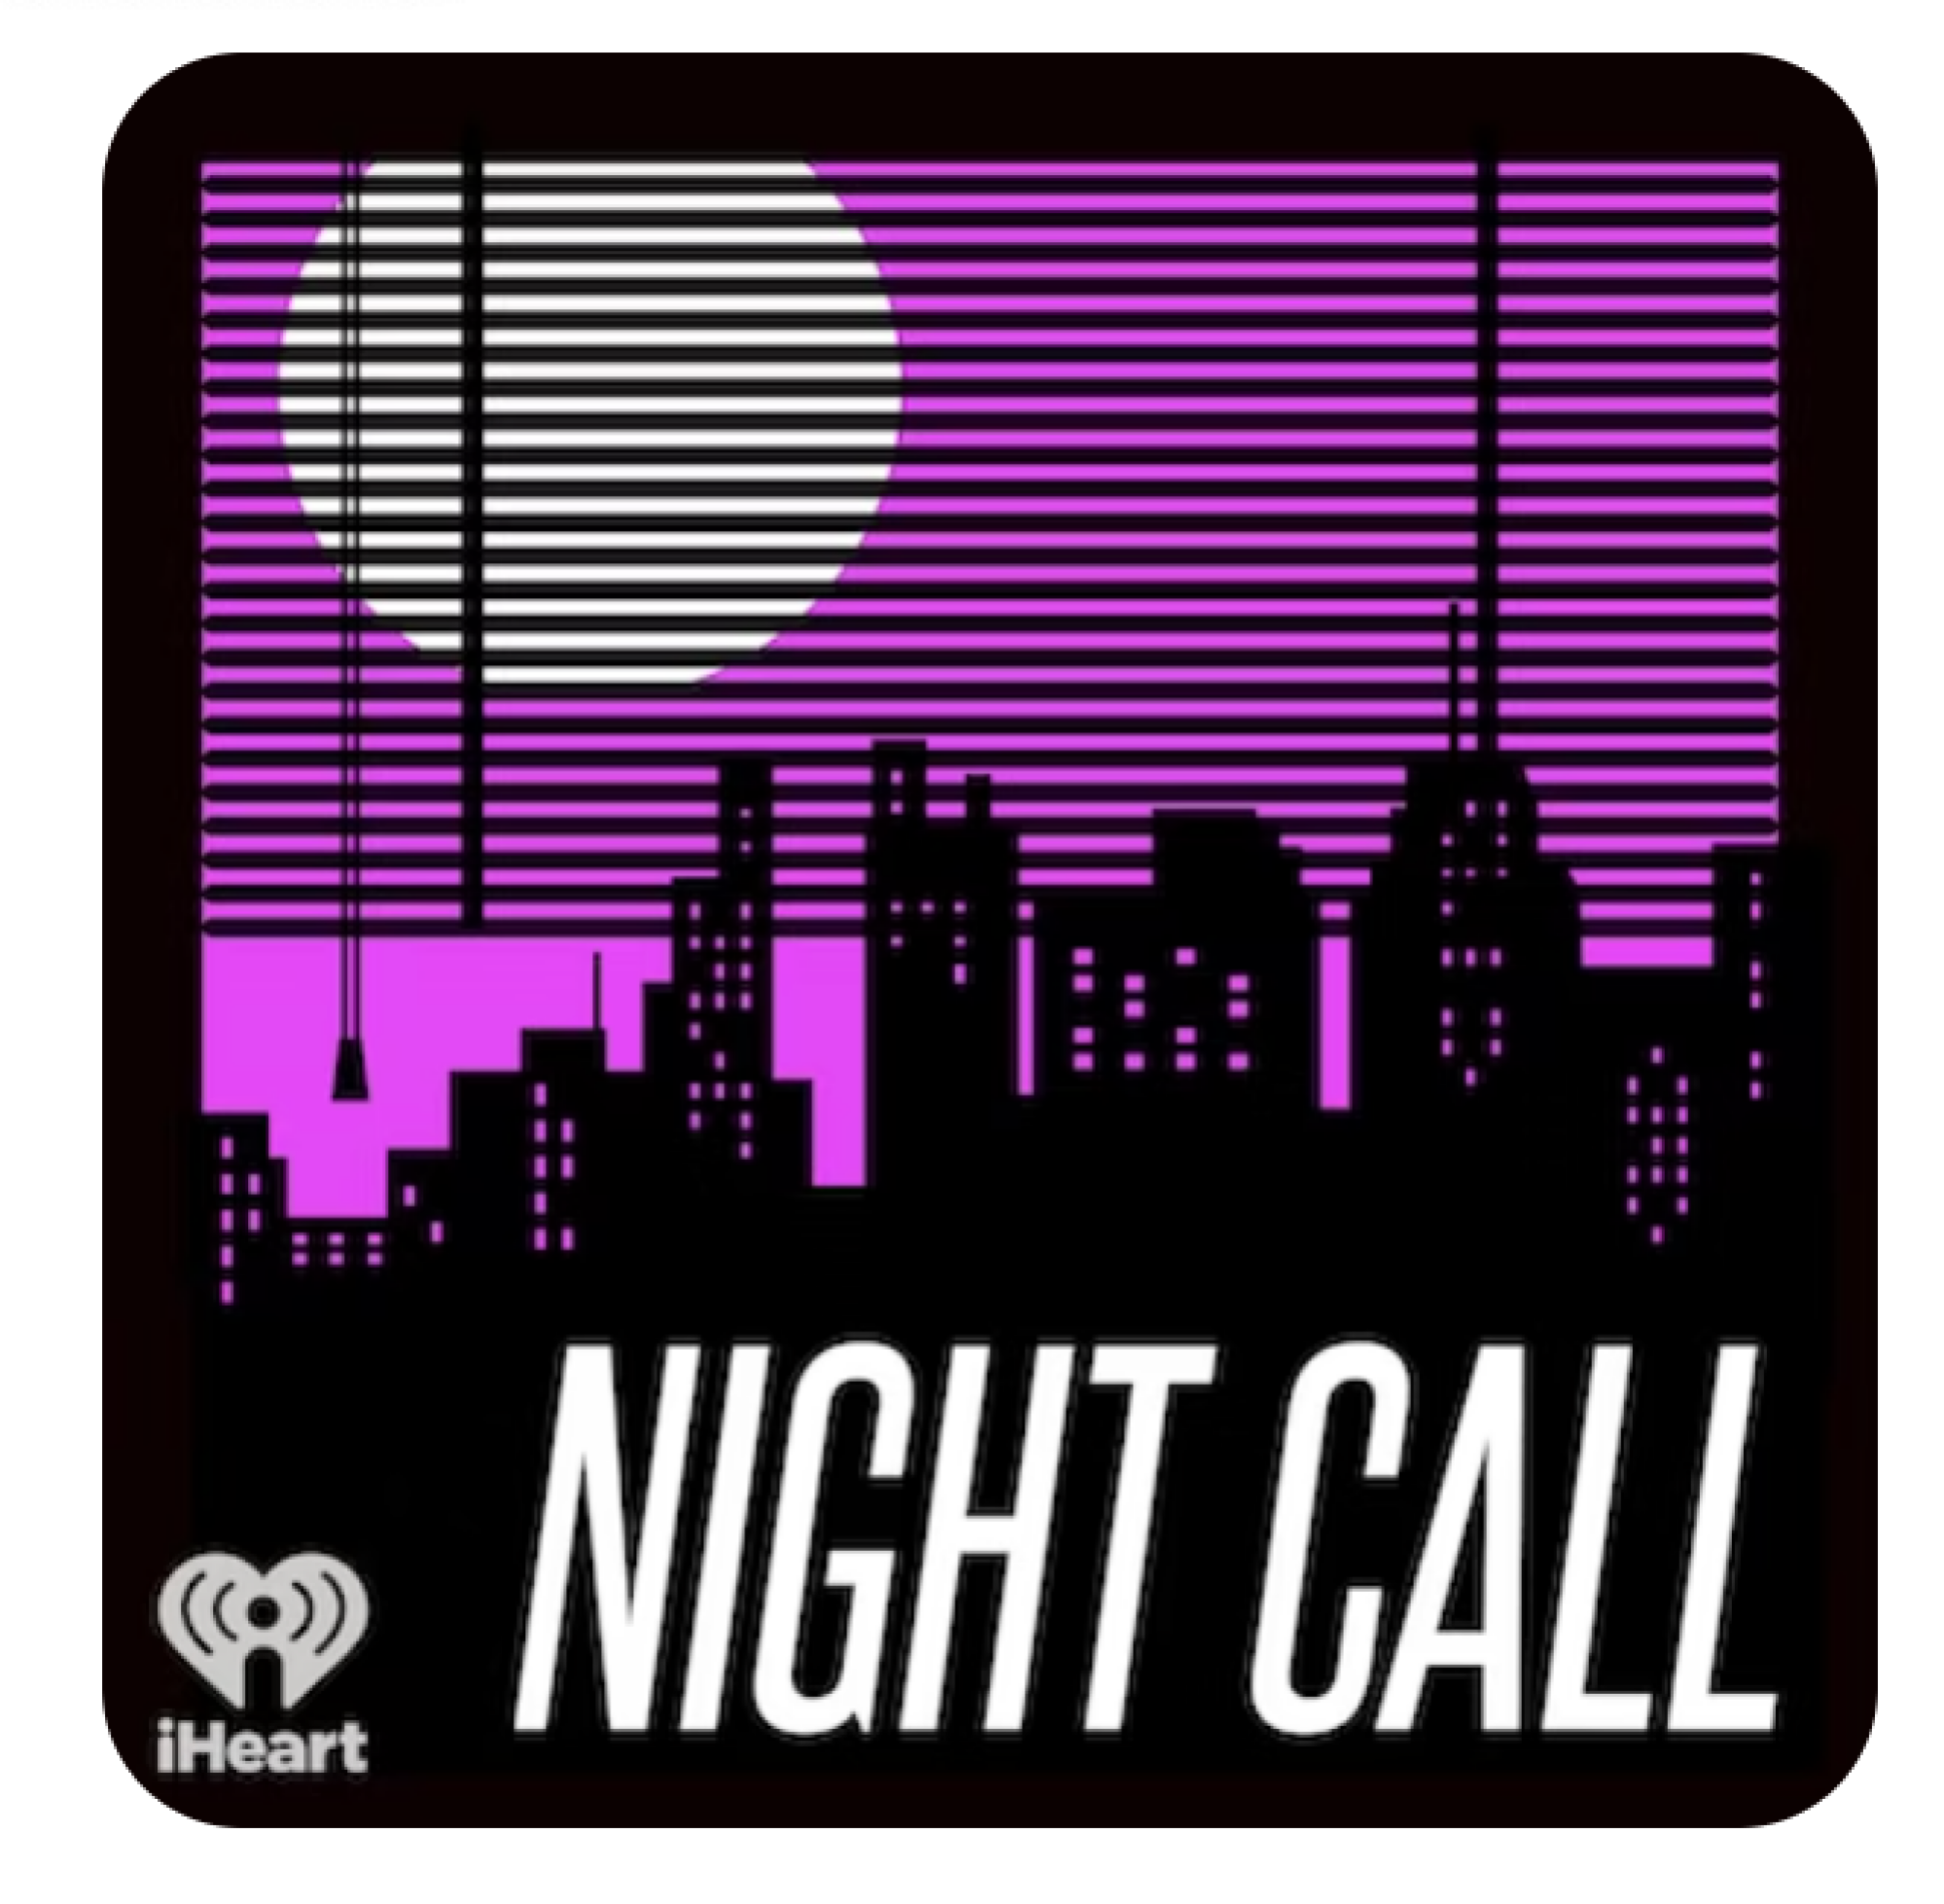 dave keech recommends Night Calls Full Episodes